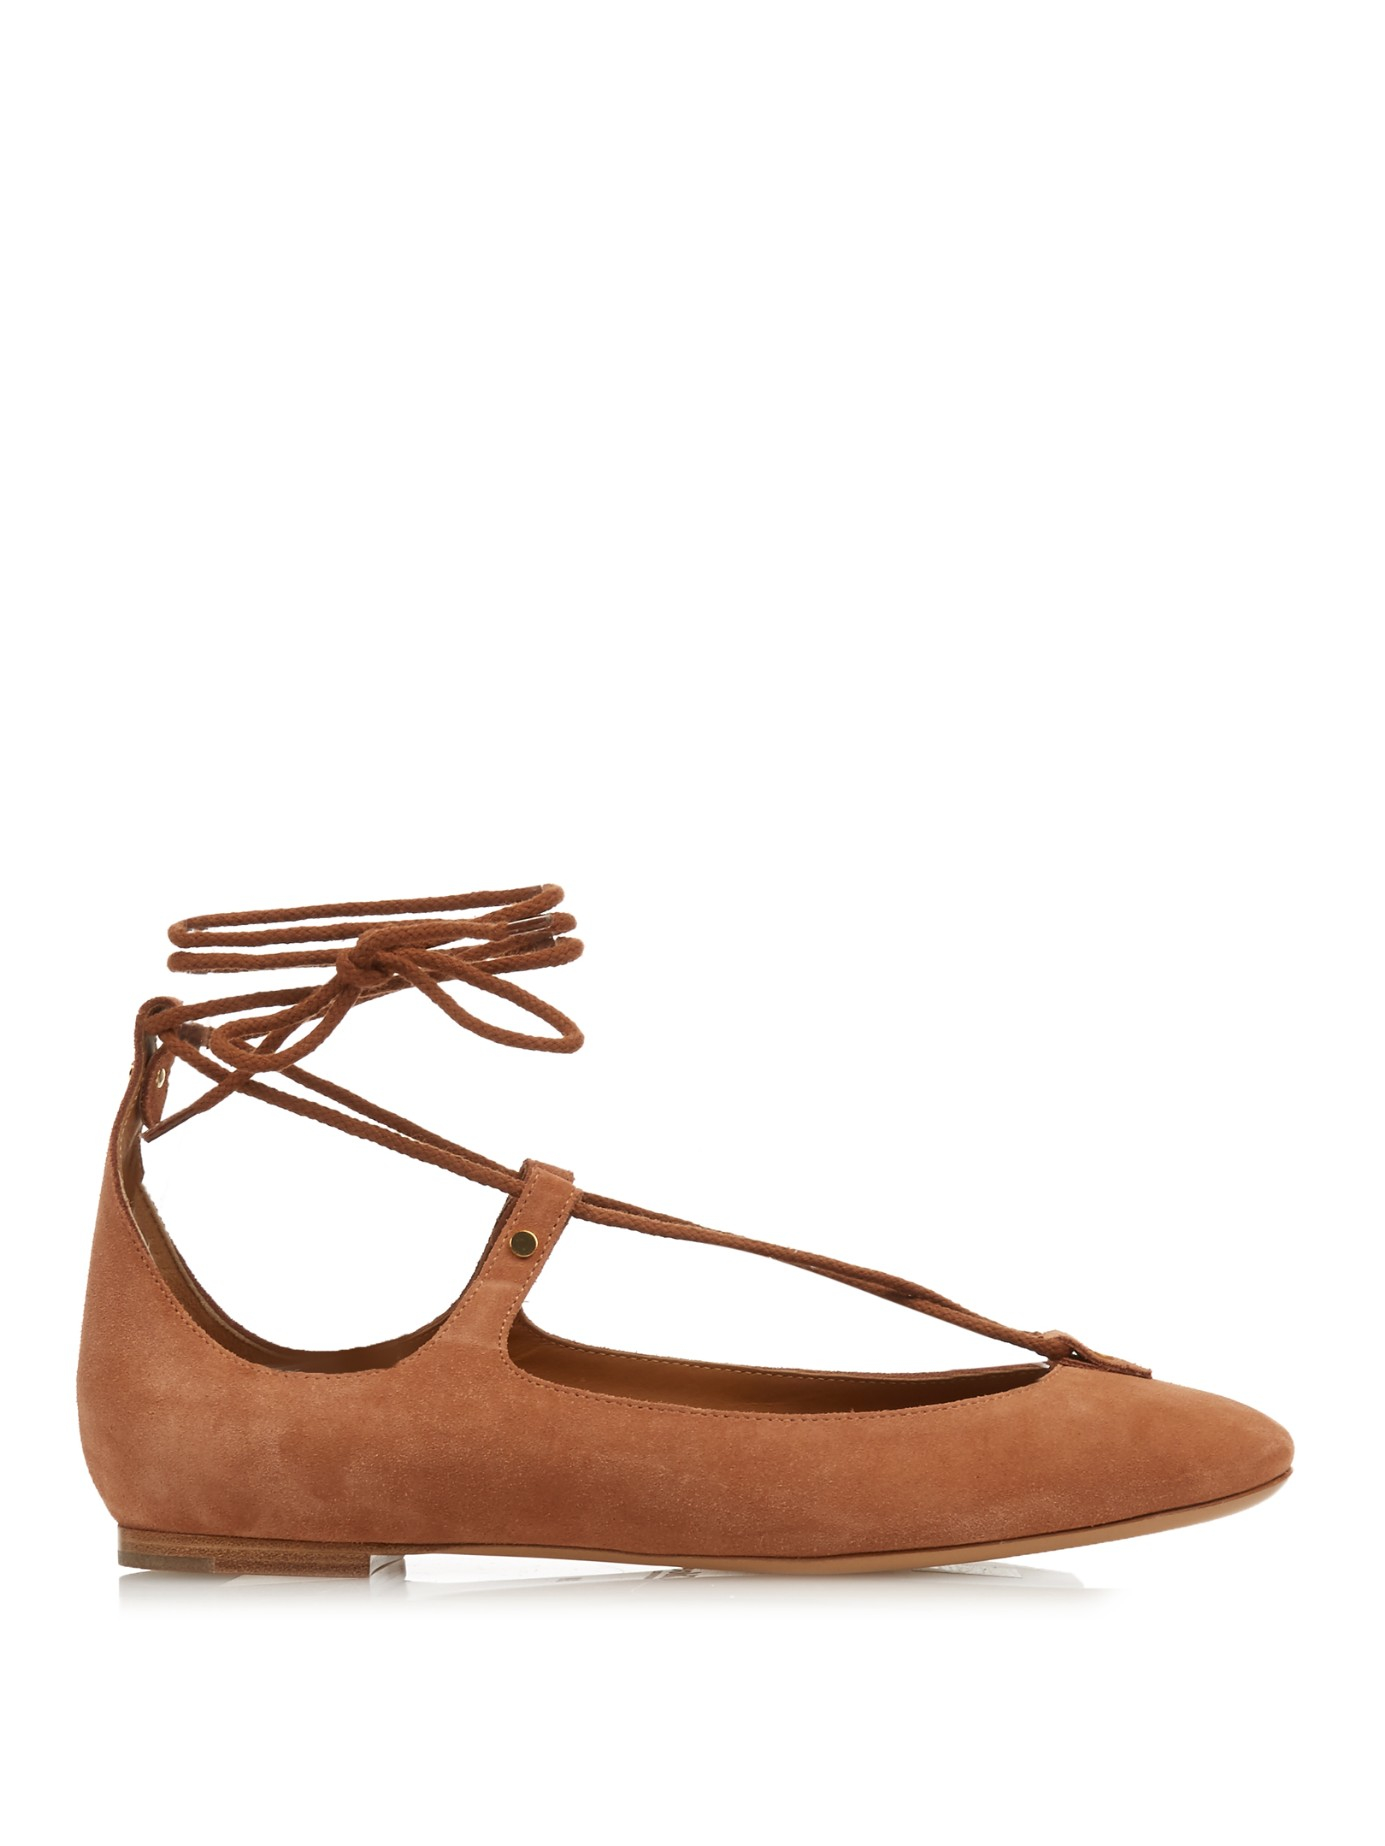 Chloé Lace-up Suede Ballet Flats in Tan (Brown) - Lyst